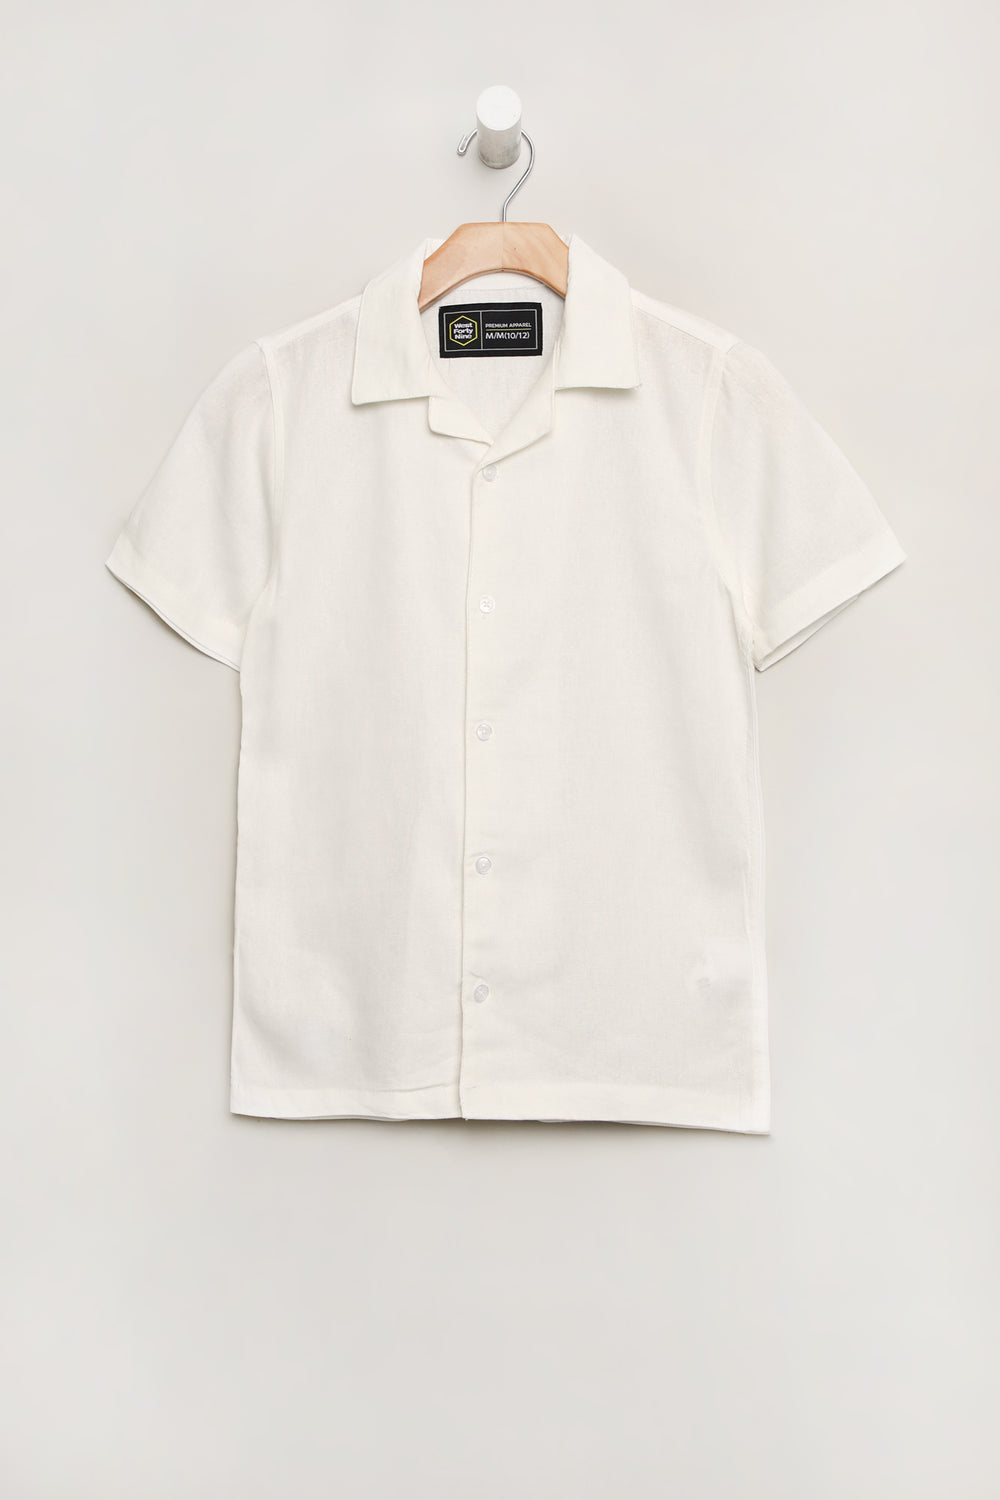 West49 Youth Linen Button-Up West49 Youth Linen Button-Up